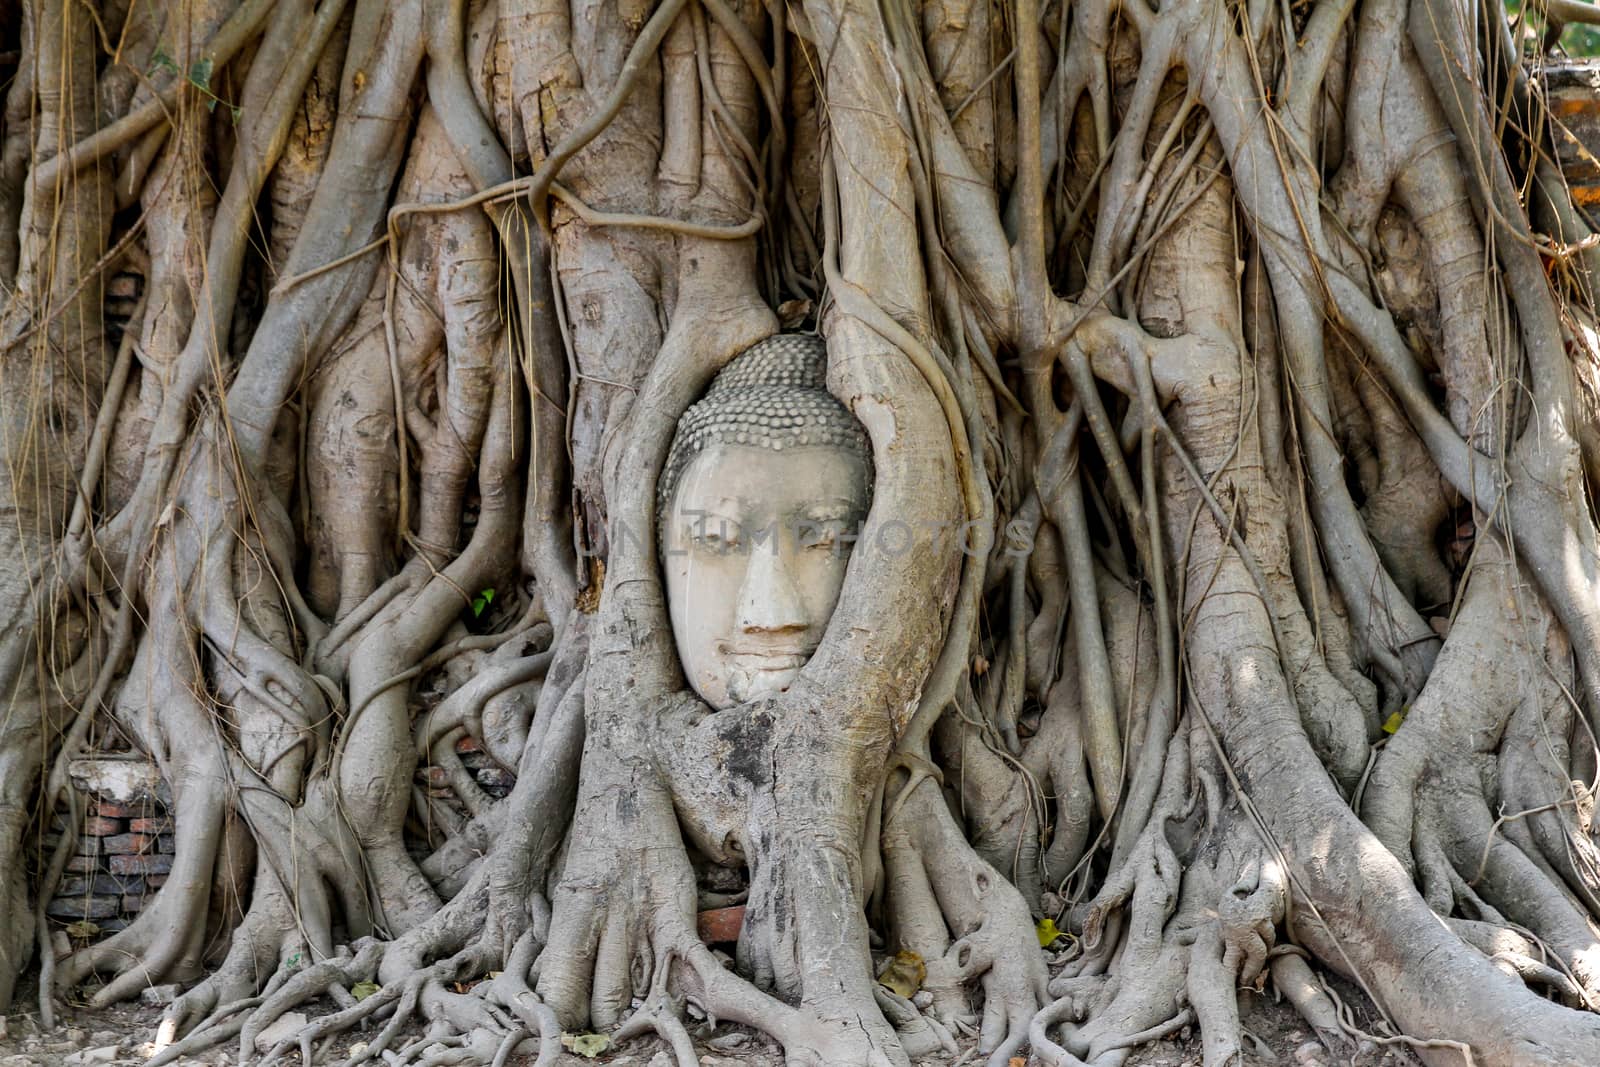 head budda status in tree roots at thailand by pumppump